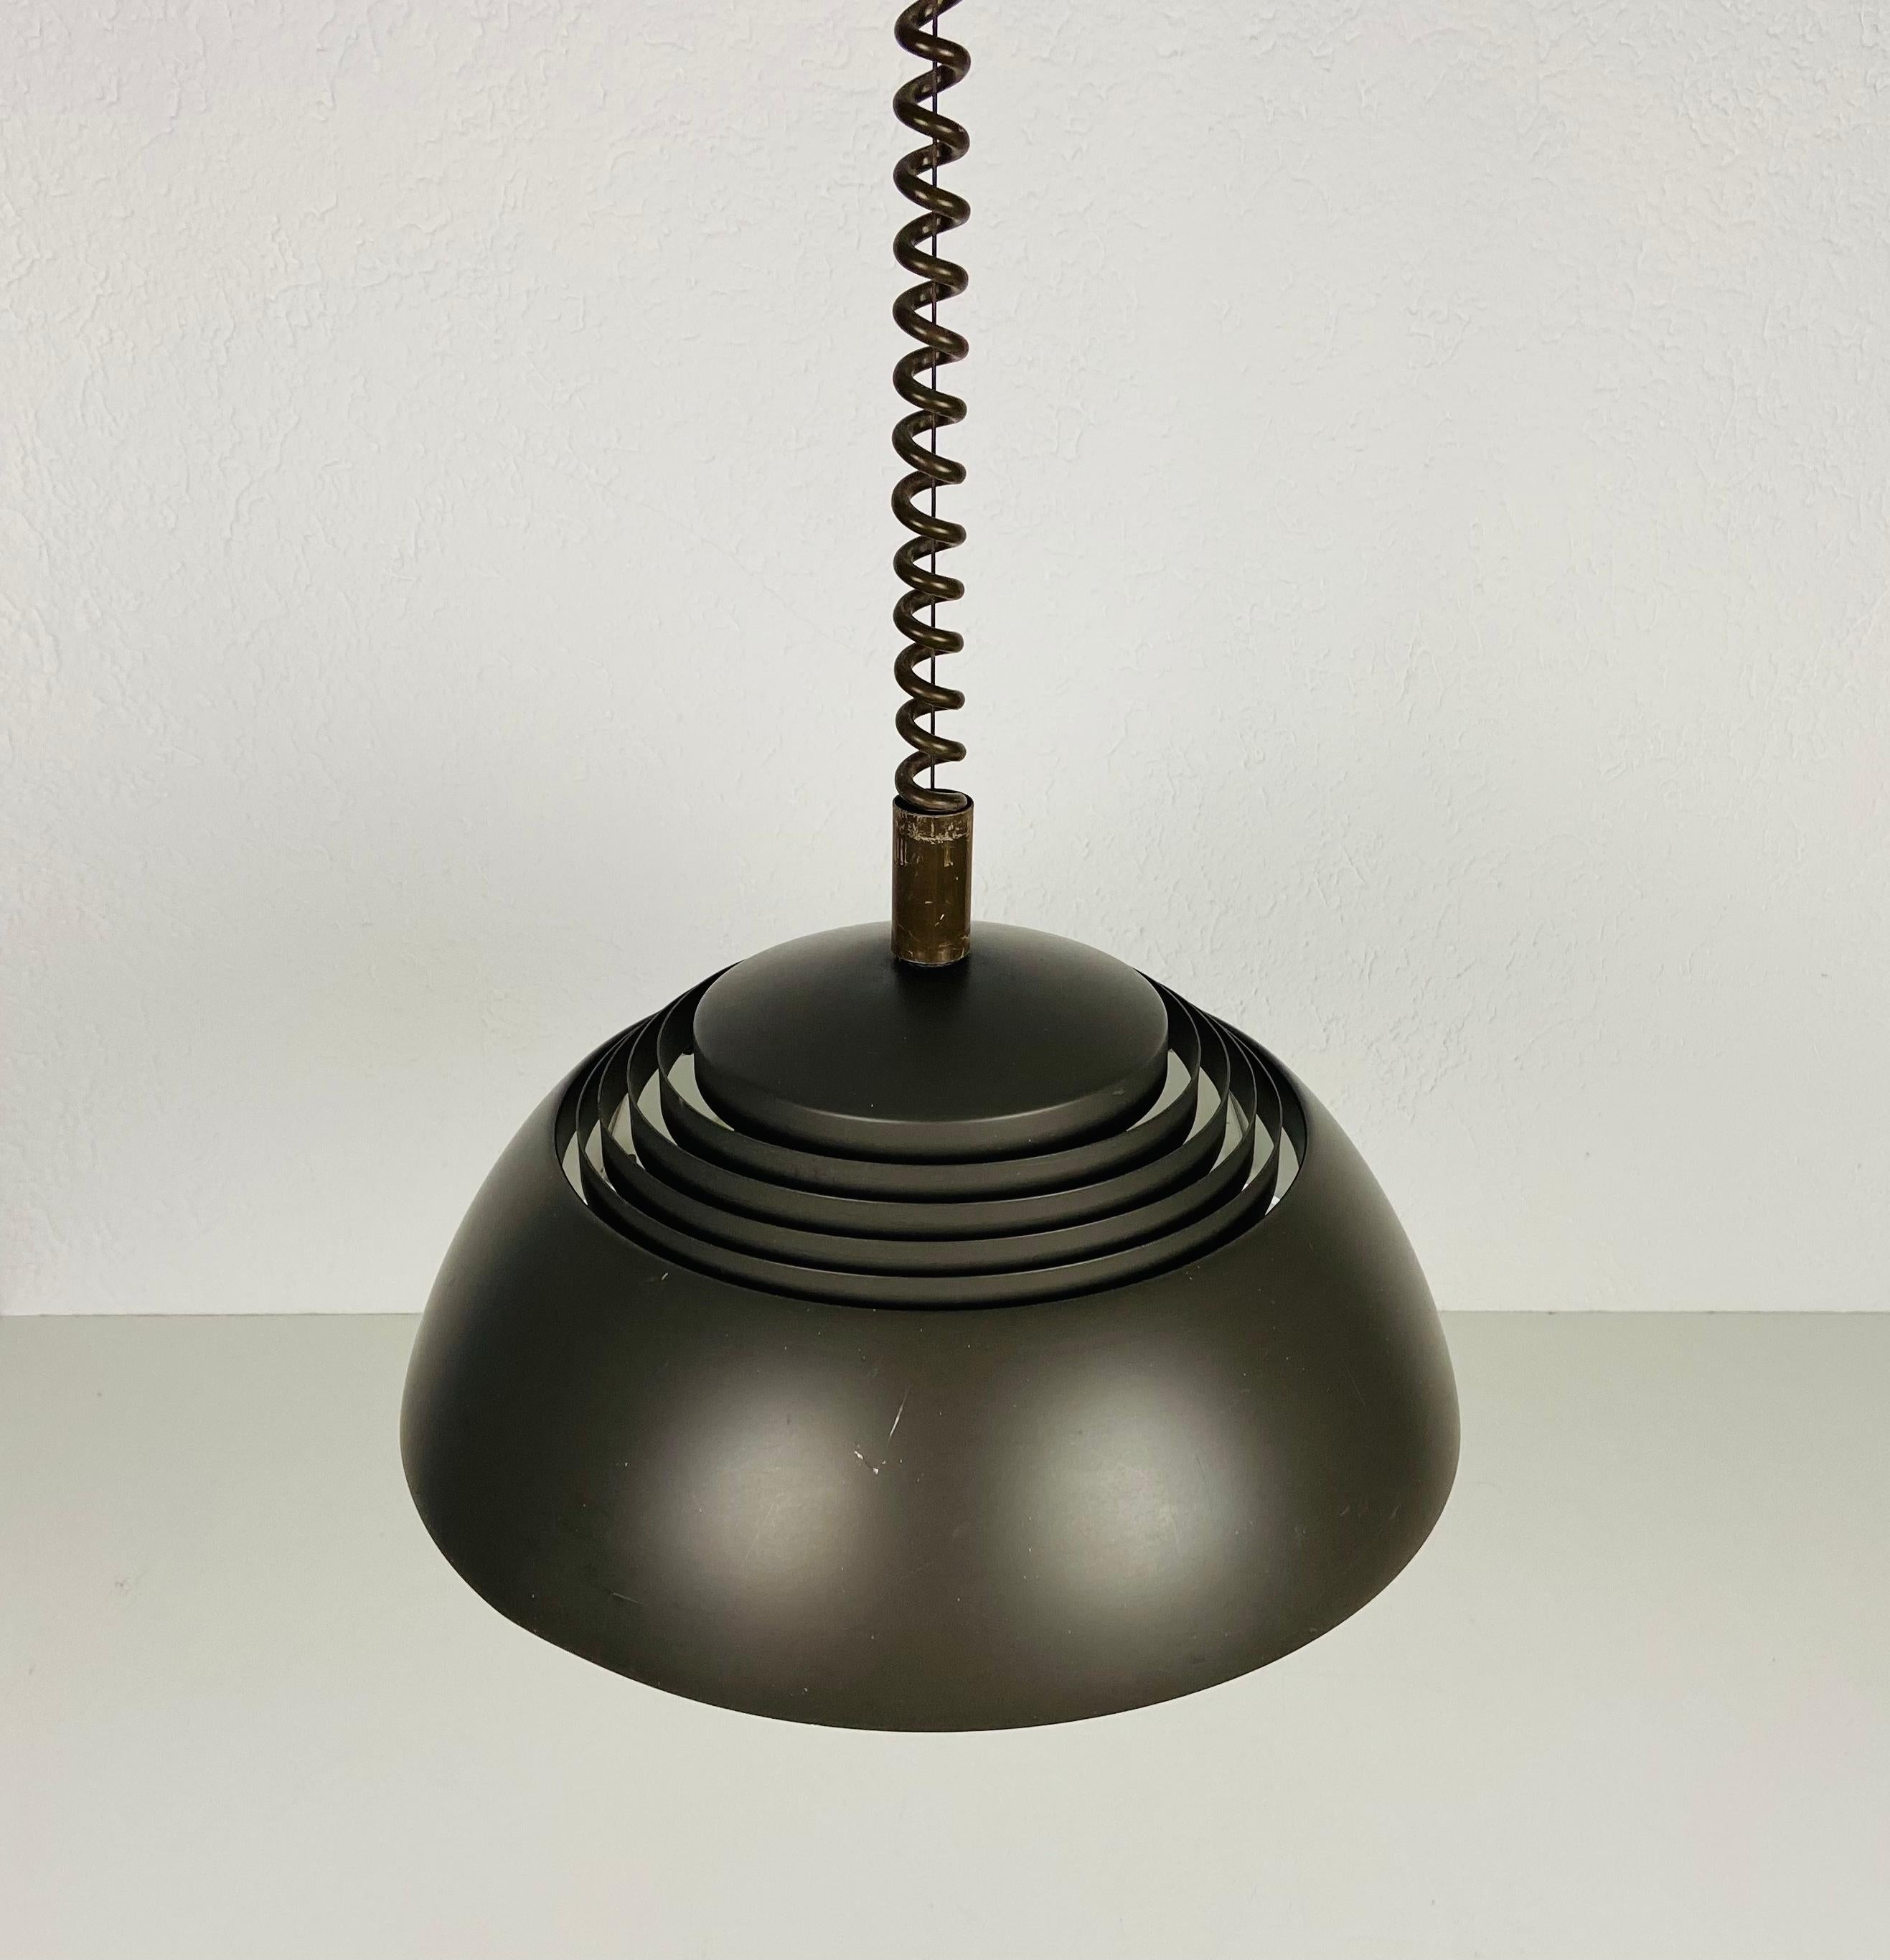 Rare pendant lamp by Arne Jacobsen made in Denmark in the 1960s. The fixture gives a very beautiful light. It is made from thin aluminum and plastic. The height is adjustable.

The light requires three E27 (US E26) light bulbs. Works with both